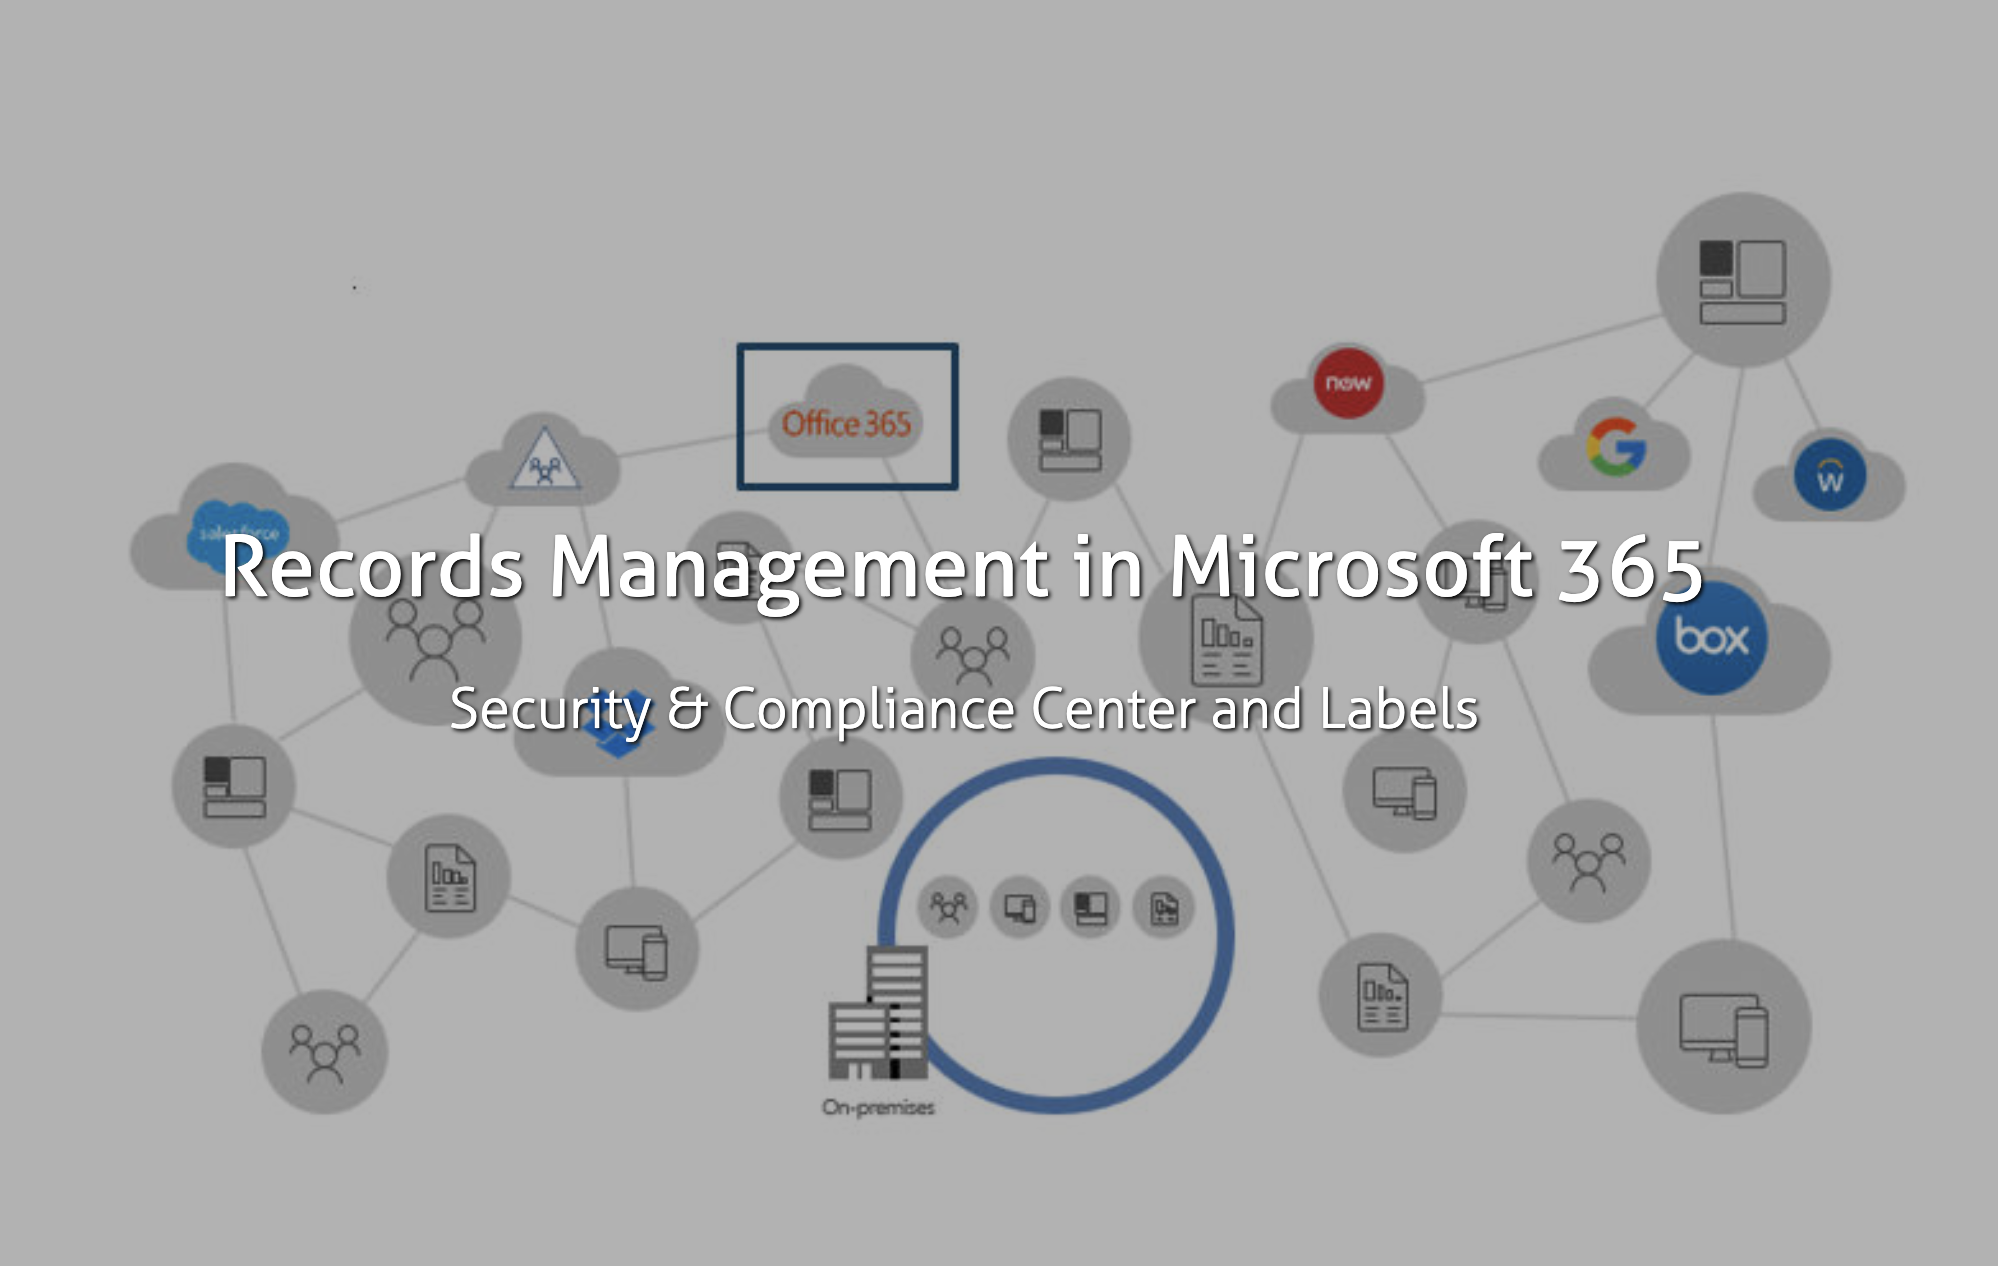 Records Management in Microsoft 365: Labels